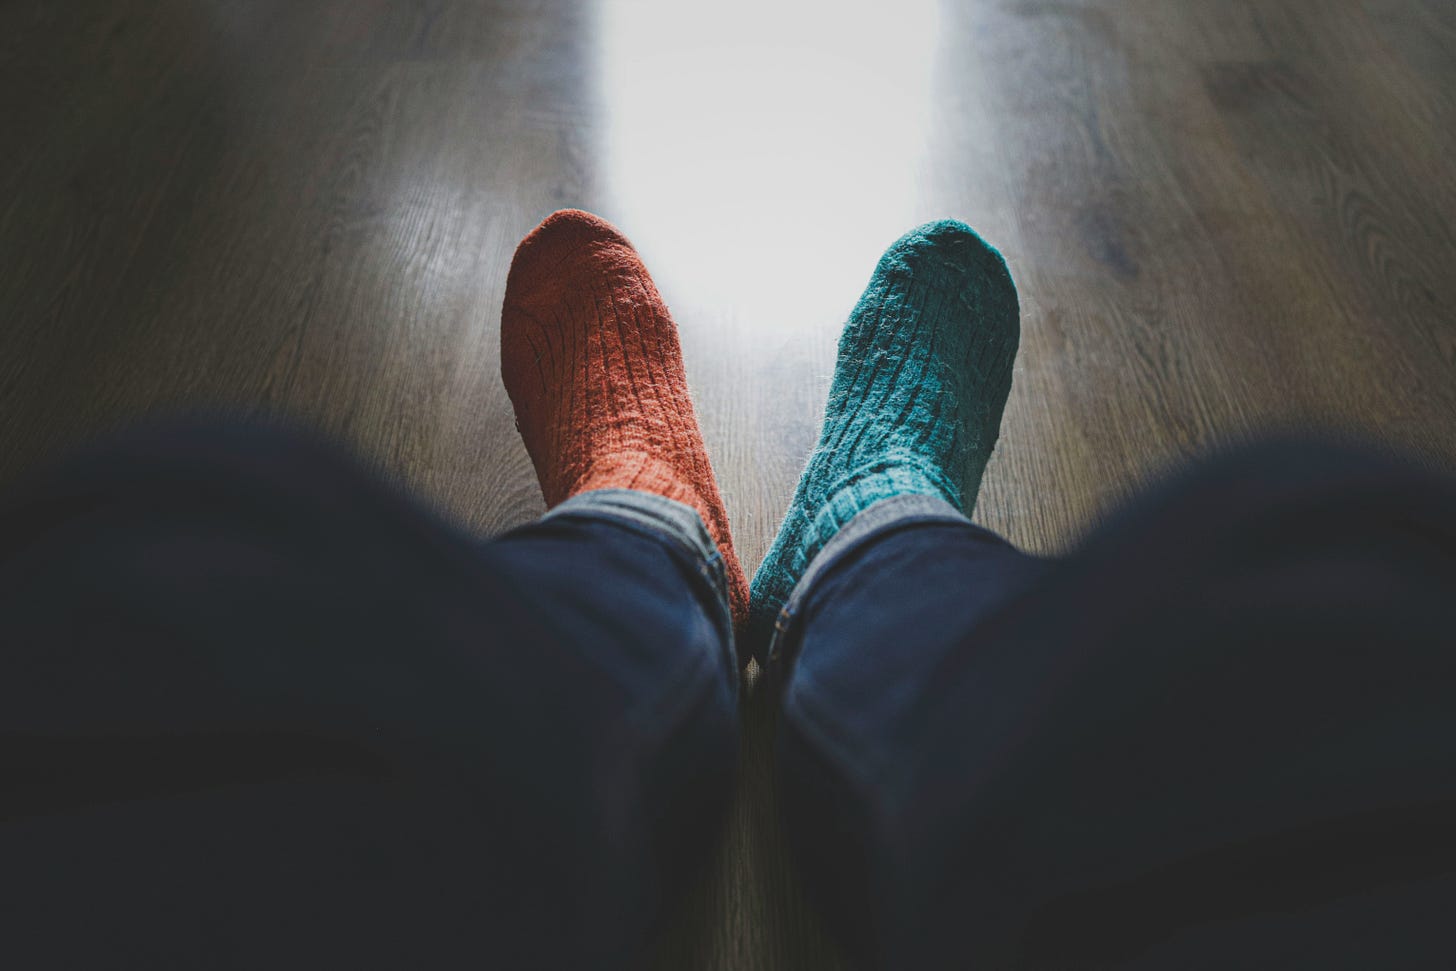 wearing long blue jeans, a person sits with two thick woolen socks - one red, one green